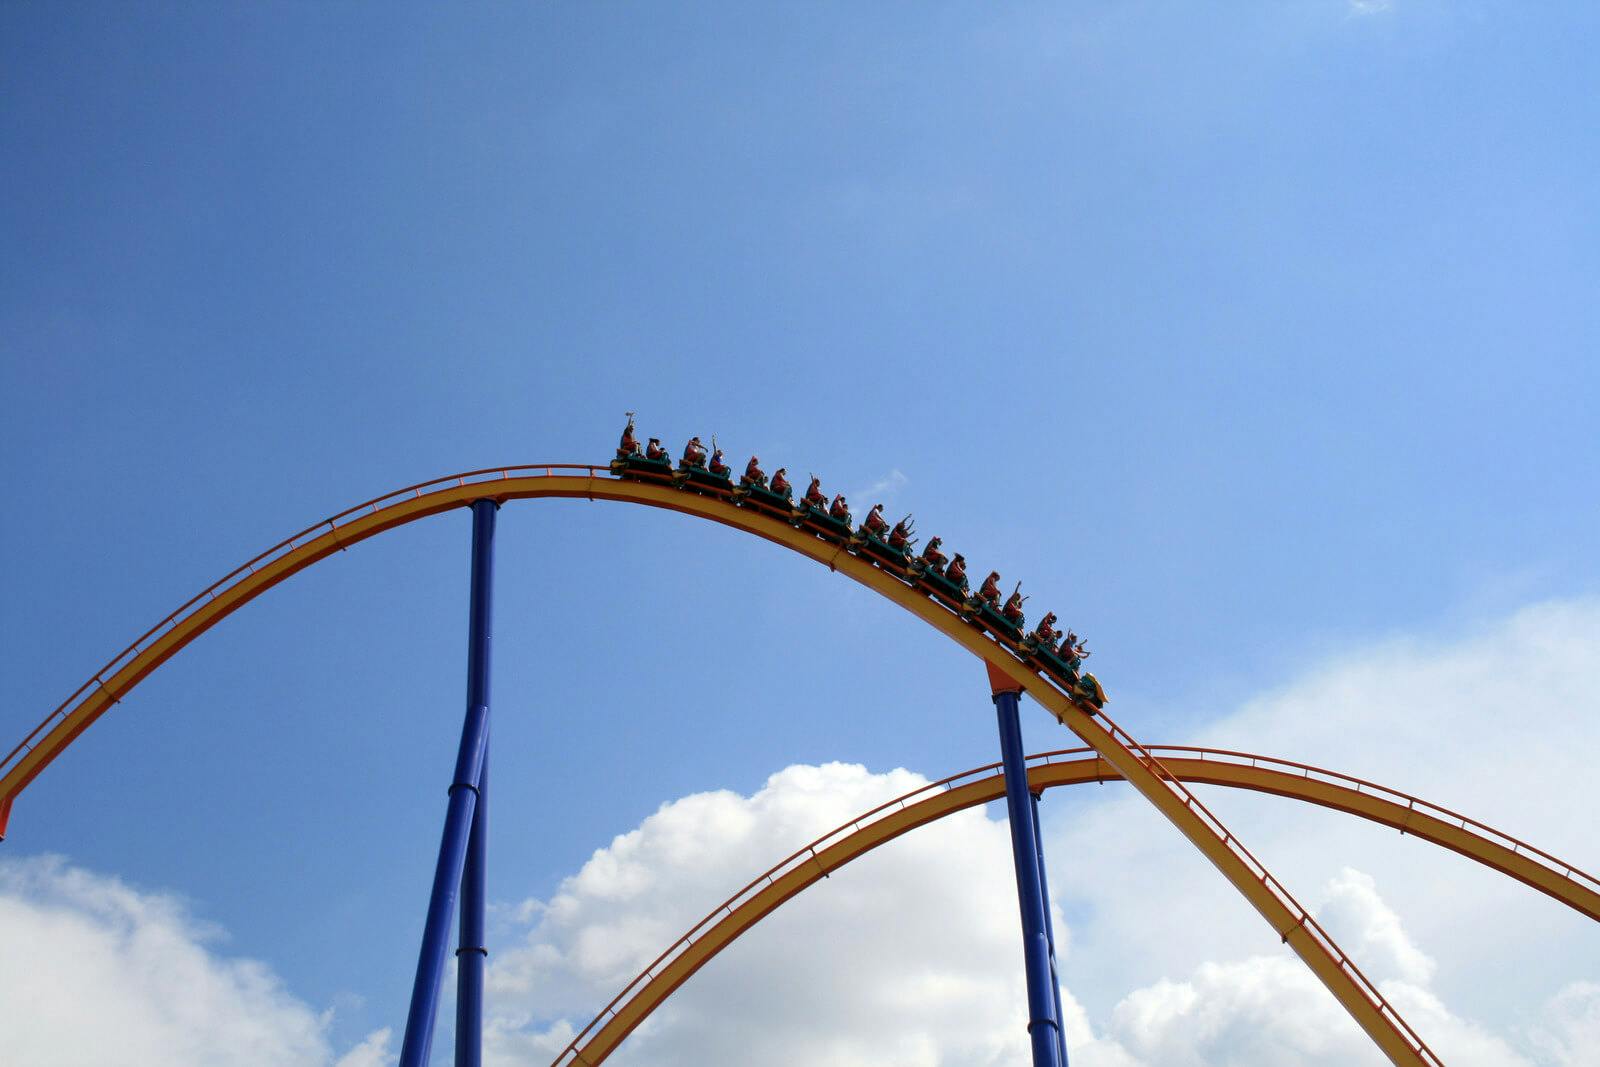 People on a rollercoaster with blue sky behind